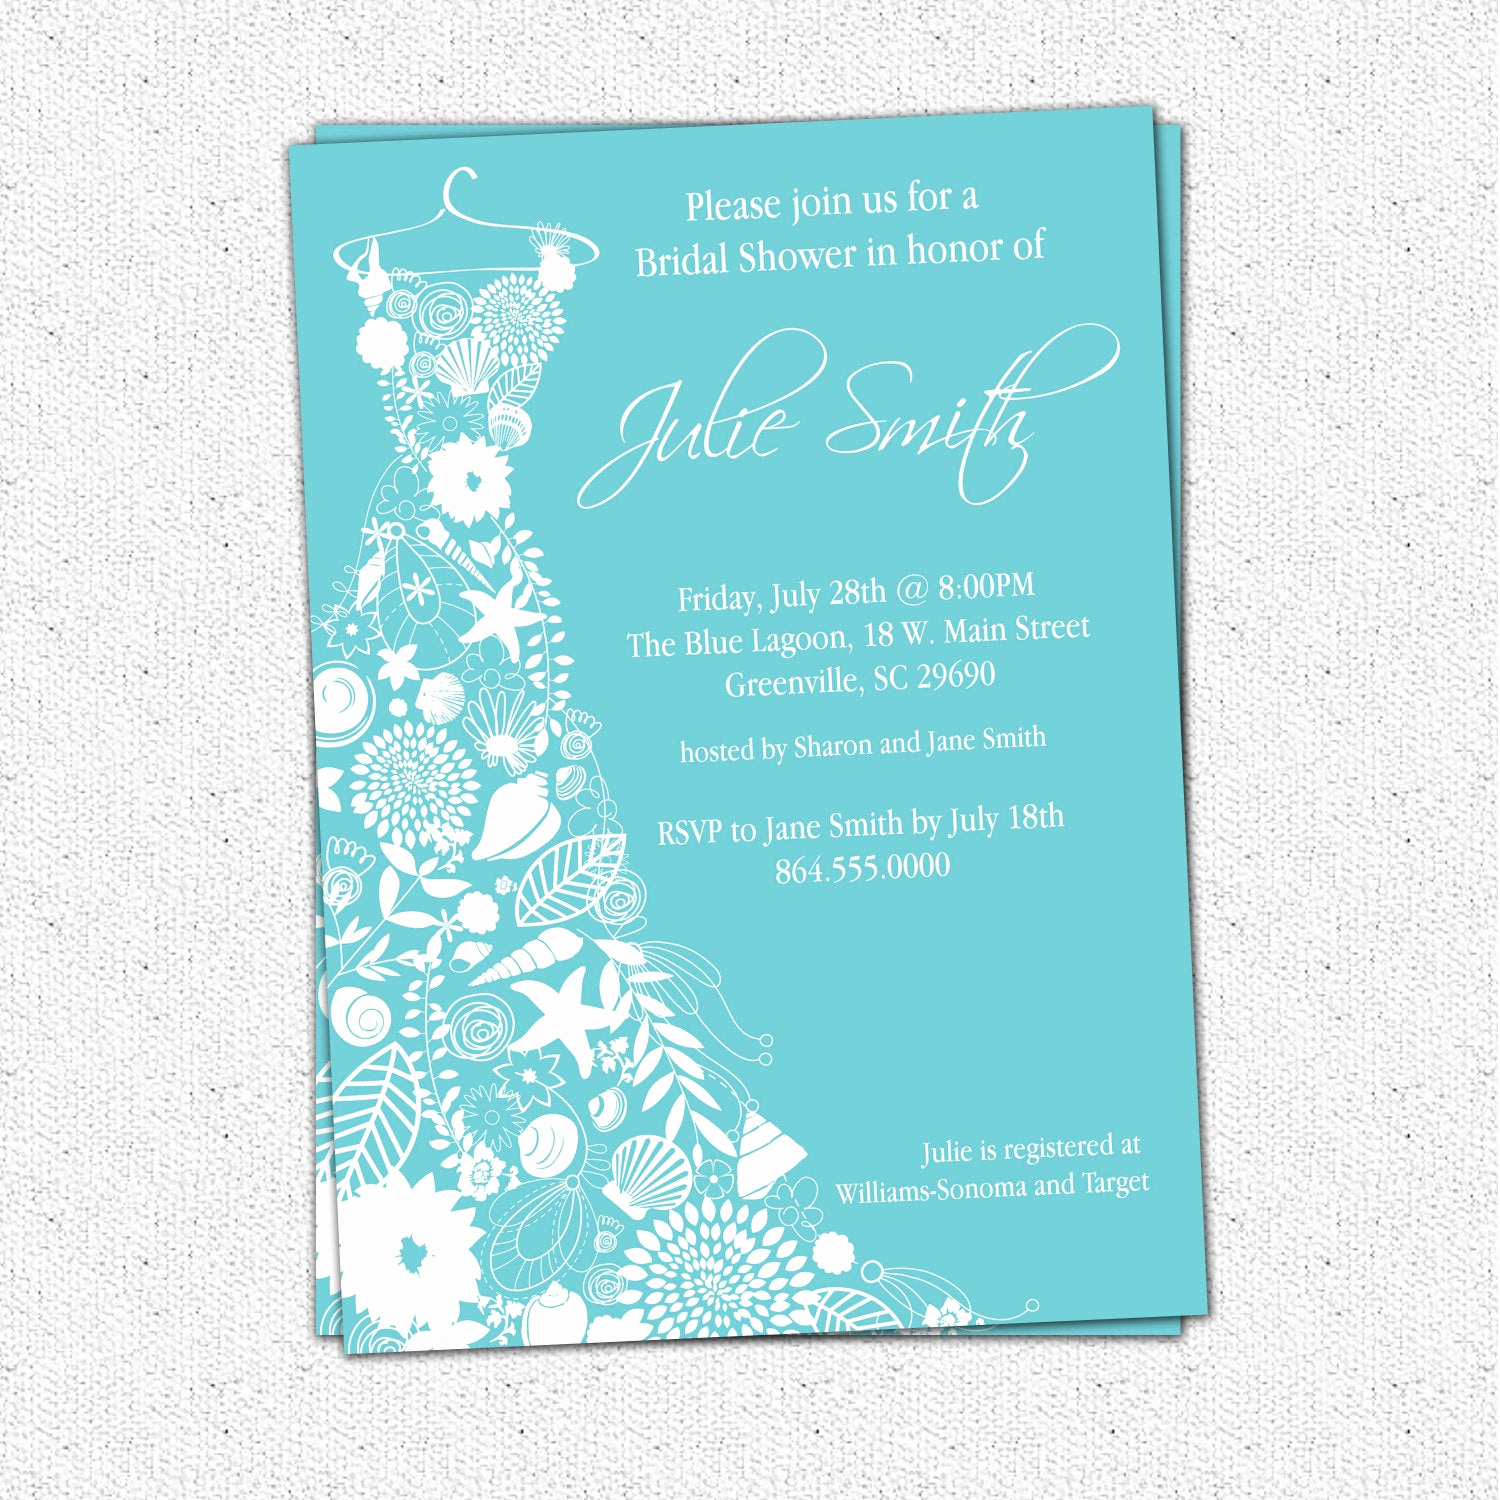 Printable Bridal Shower Invitations Awesome Printable Bridal Shower Invitation Floral Seashell Dress